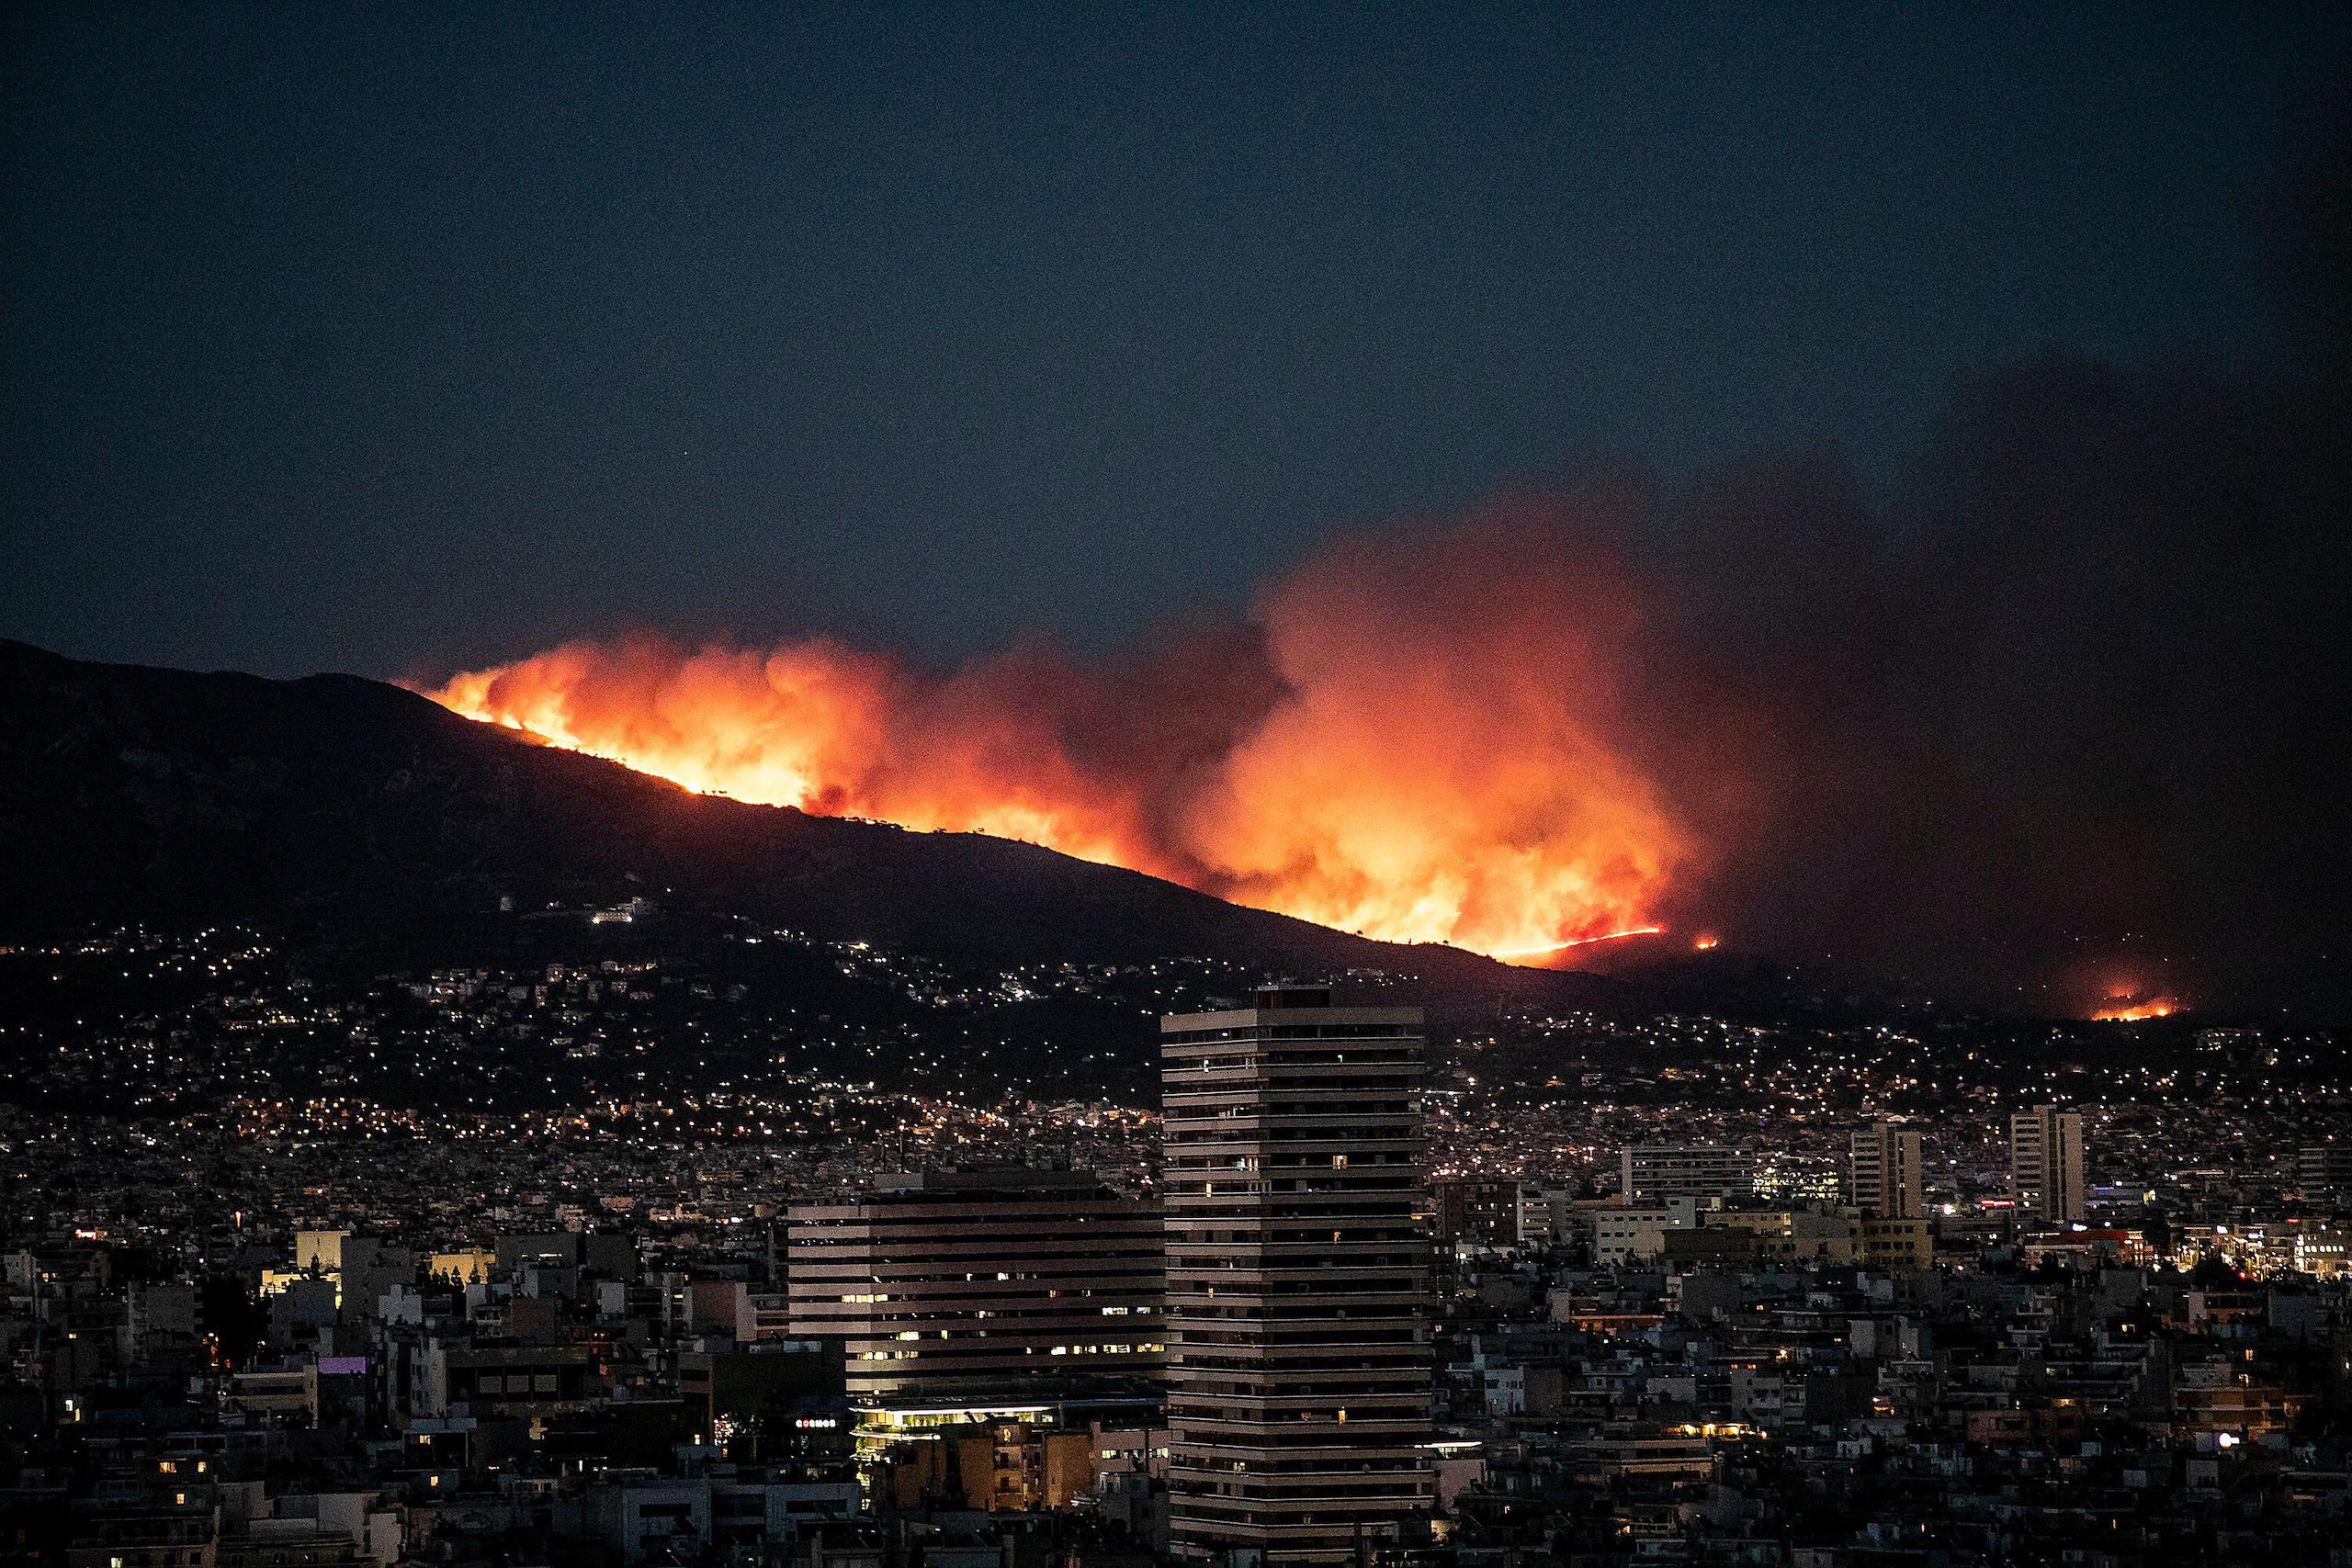 <p>A massive wildfire atop a mountain in the northern suburbs of Athens, Greece (Image: Panagiotis Moschandreou / Alamy)</p>